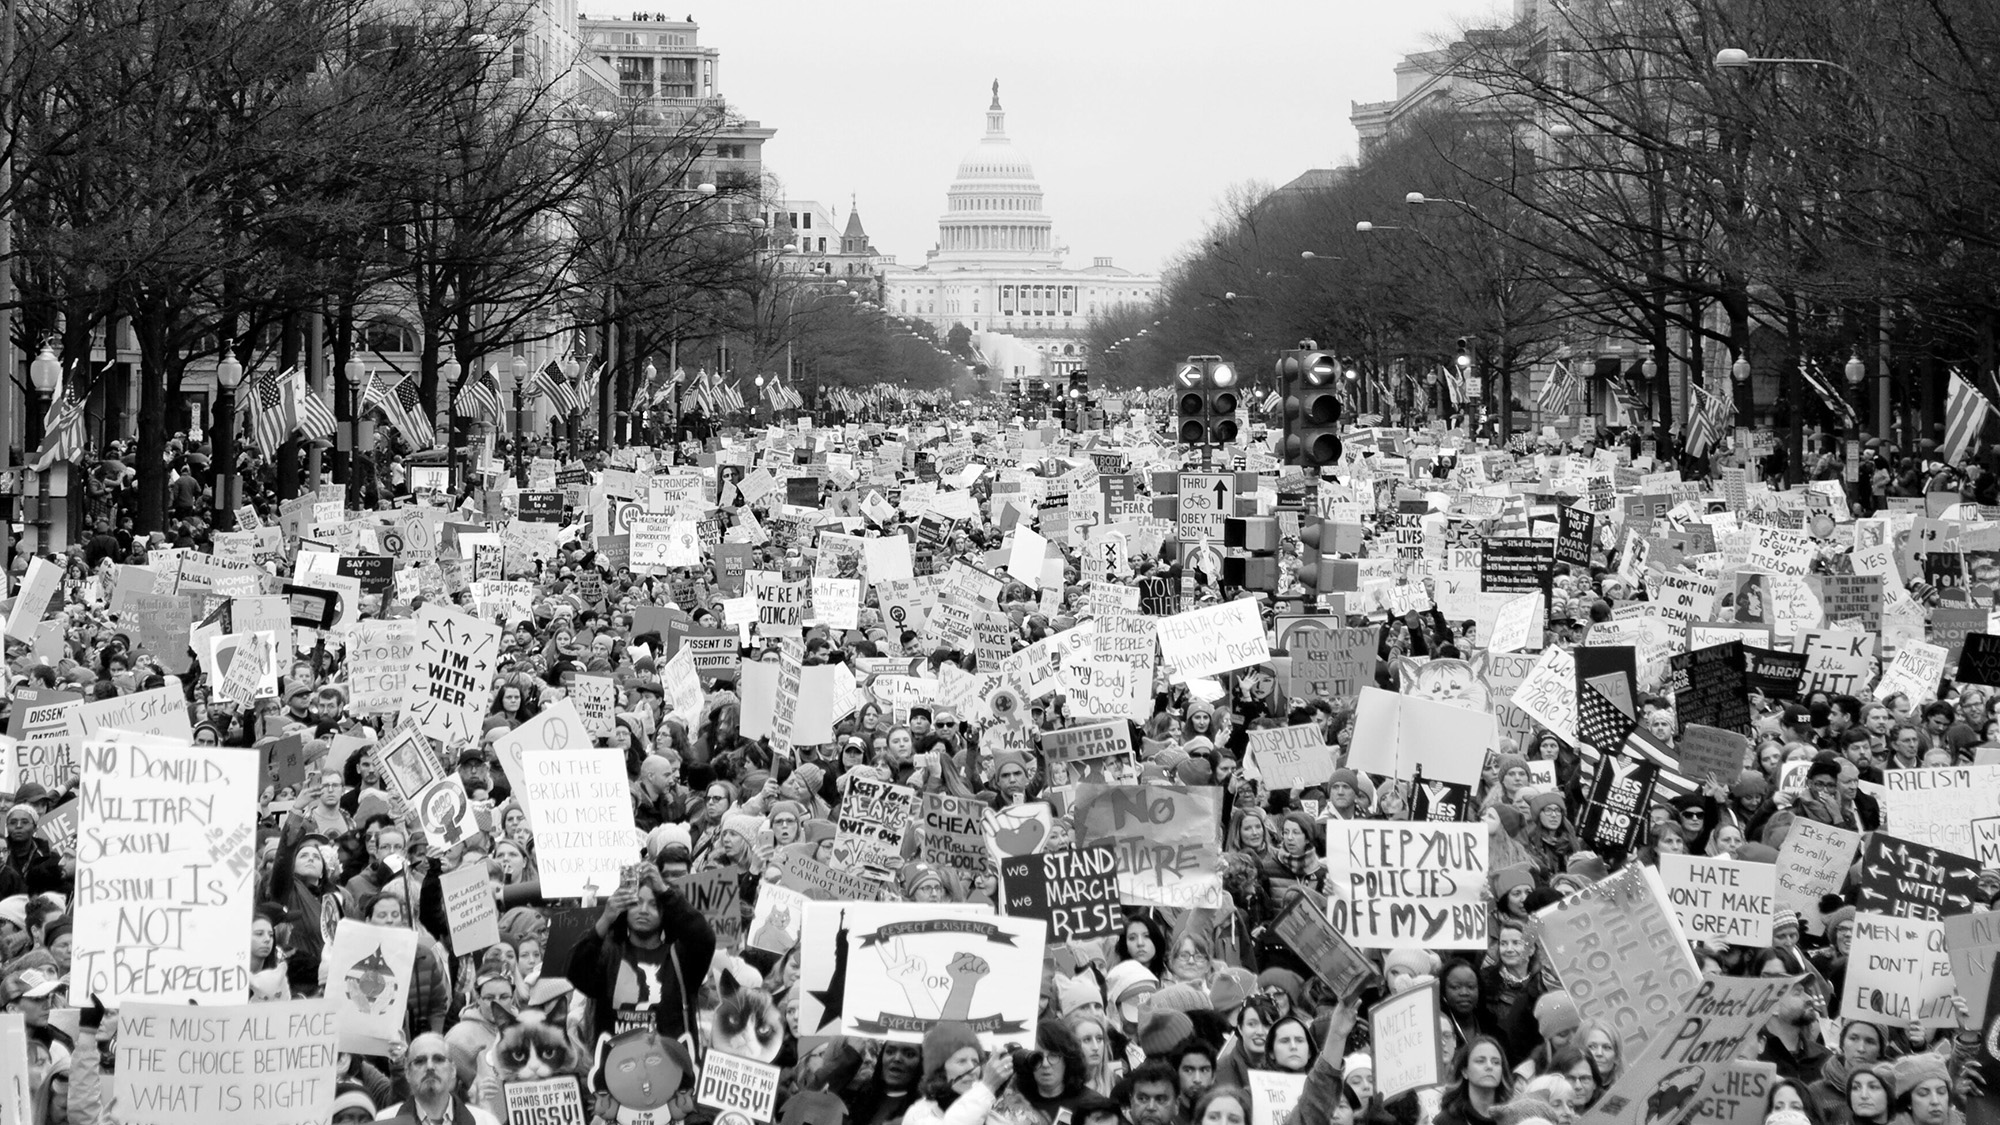 A protest happening in Washington, D.C. in black and white.